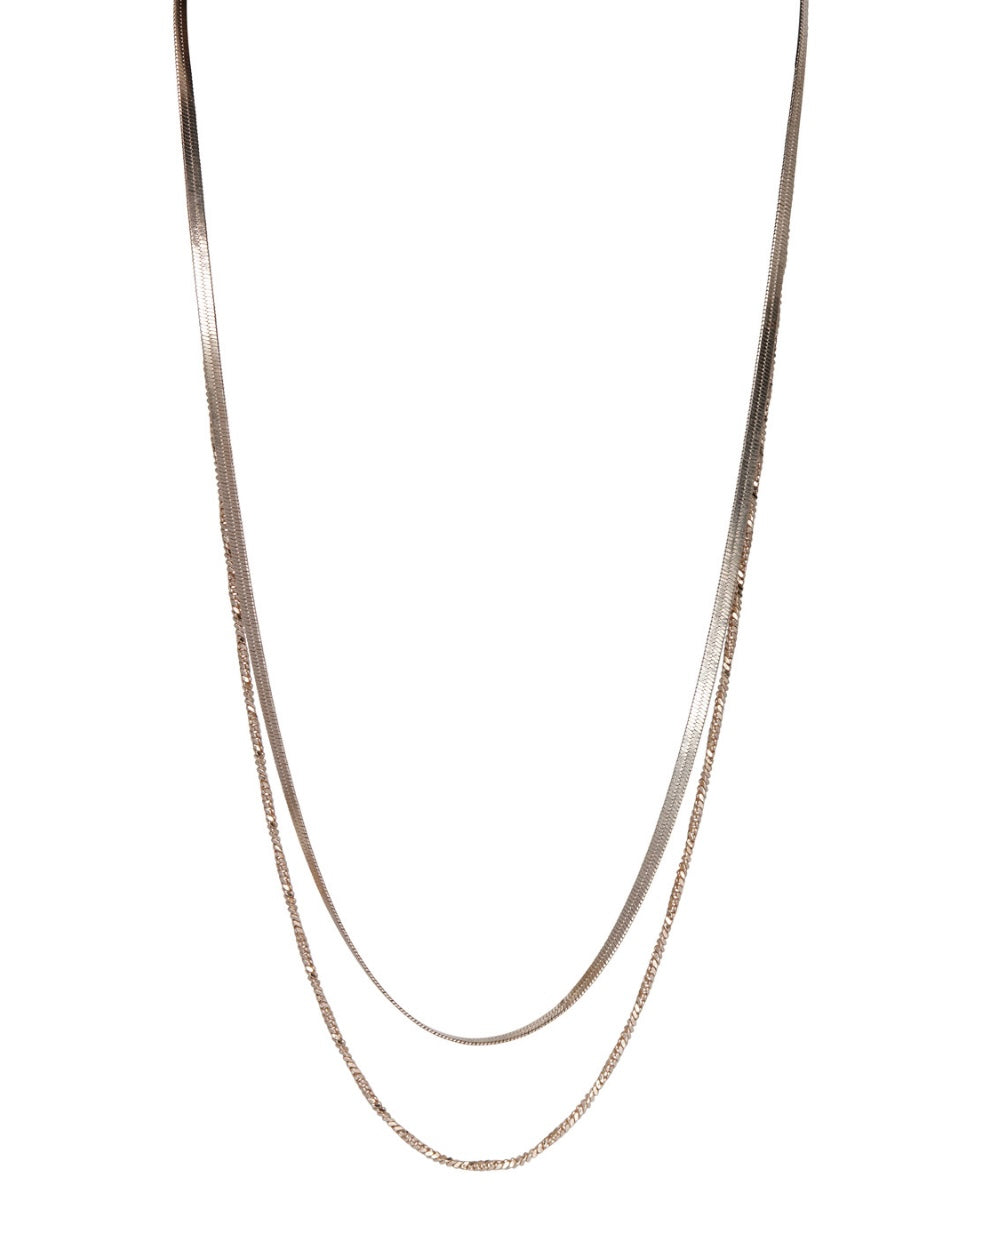 Ojia necklace